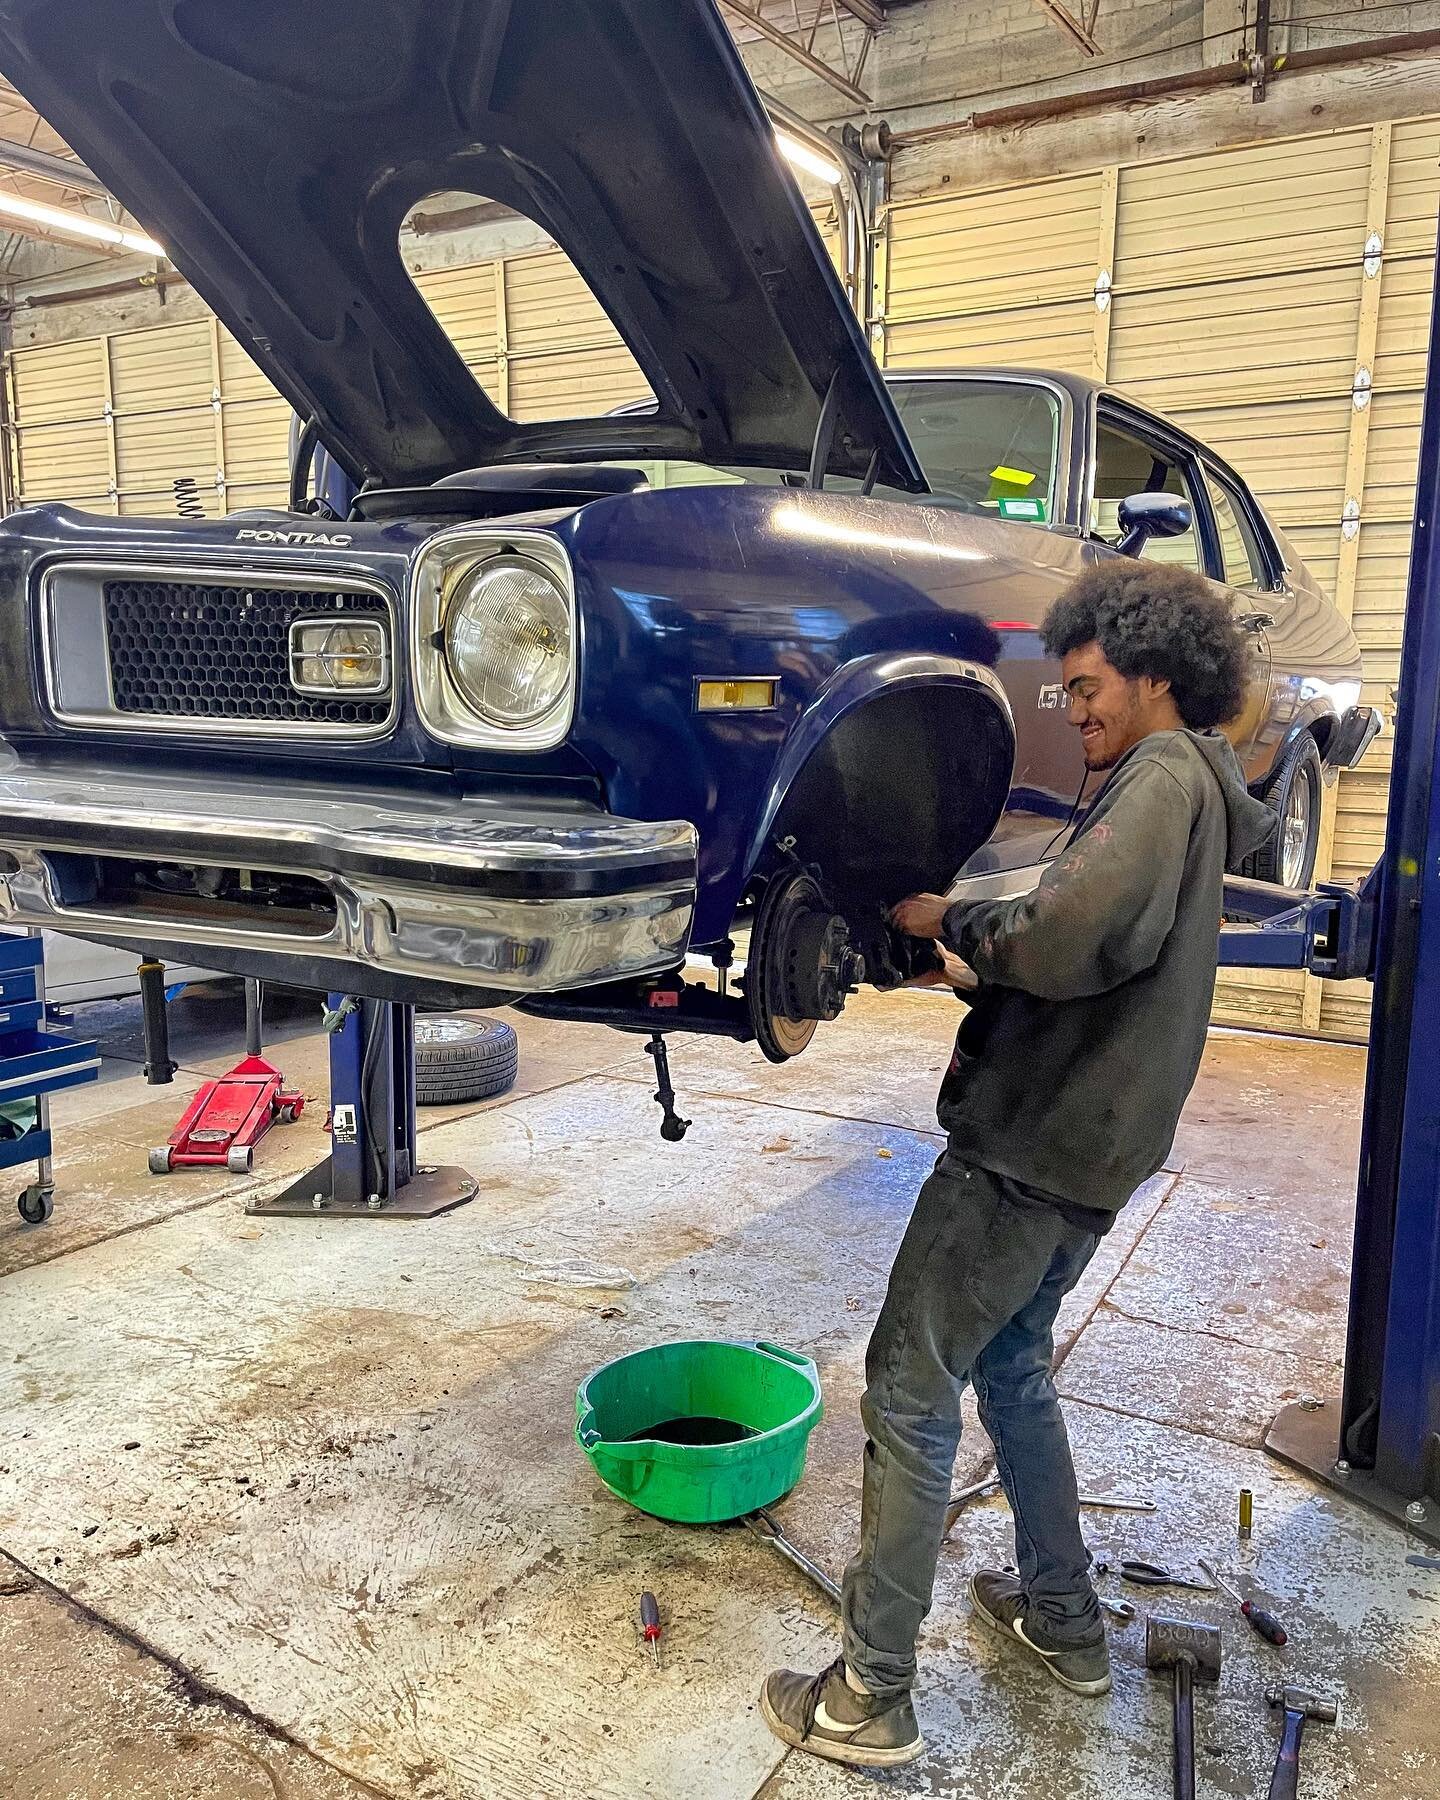 Darian working on the brakes on this 1974 Pontiac GTO we have in the shop. We are flushing all fluids, installing new rubber brake lines and upgrading the suspension. 

&bull;
&bull;
&bull;
#pontiac #gto #dfwspeedshop #pontiacgto #gtonation #autoshop